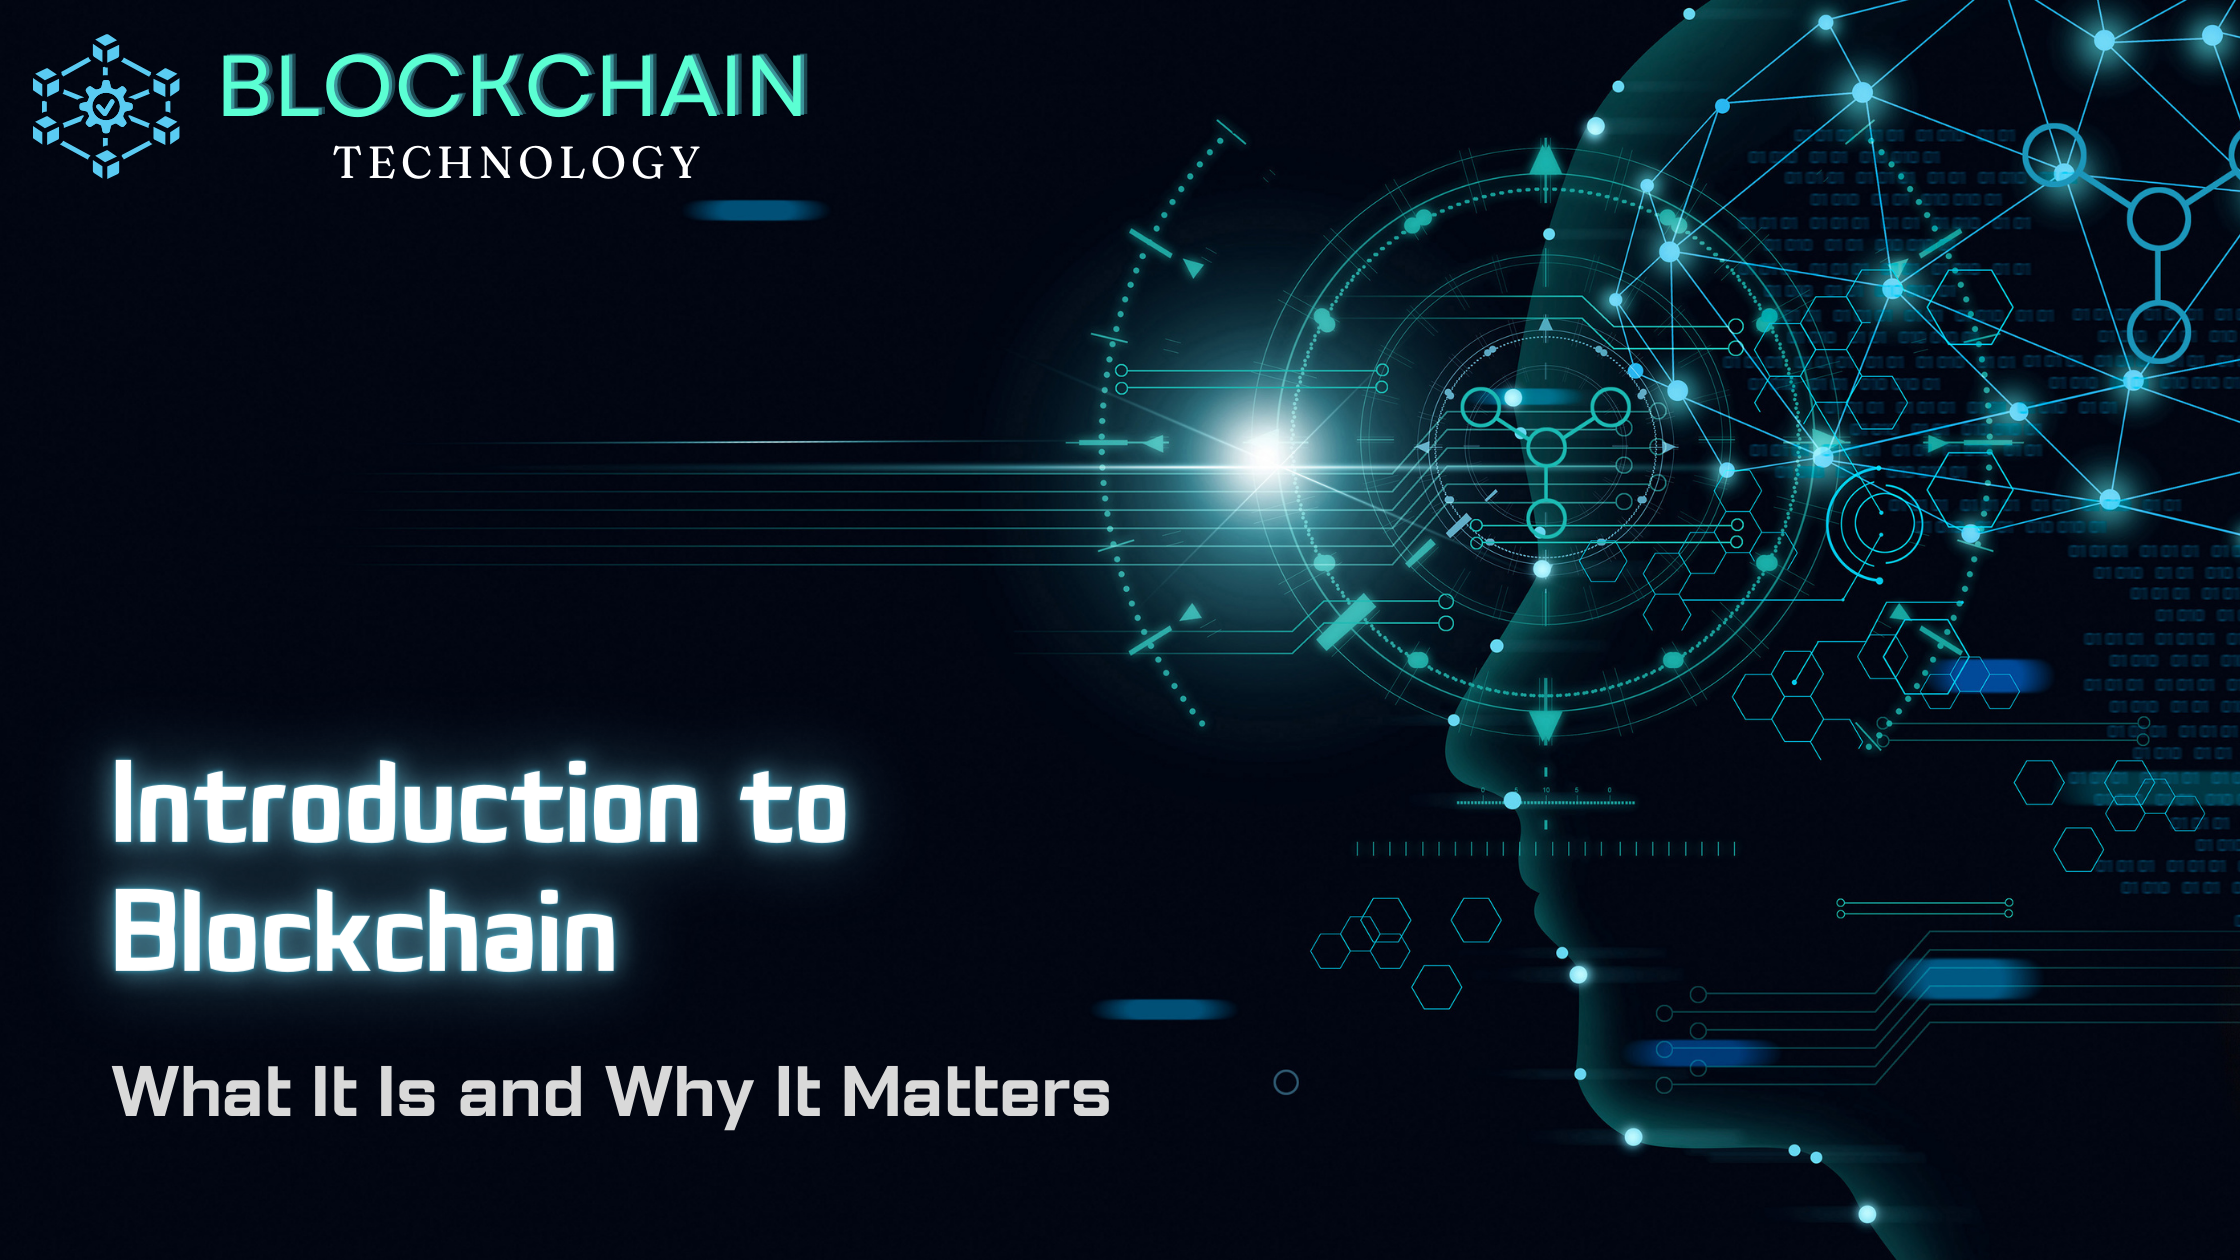 Introducing to Blockchain: What It Is and Why It Matters